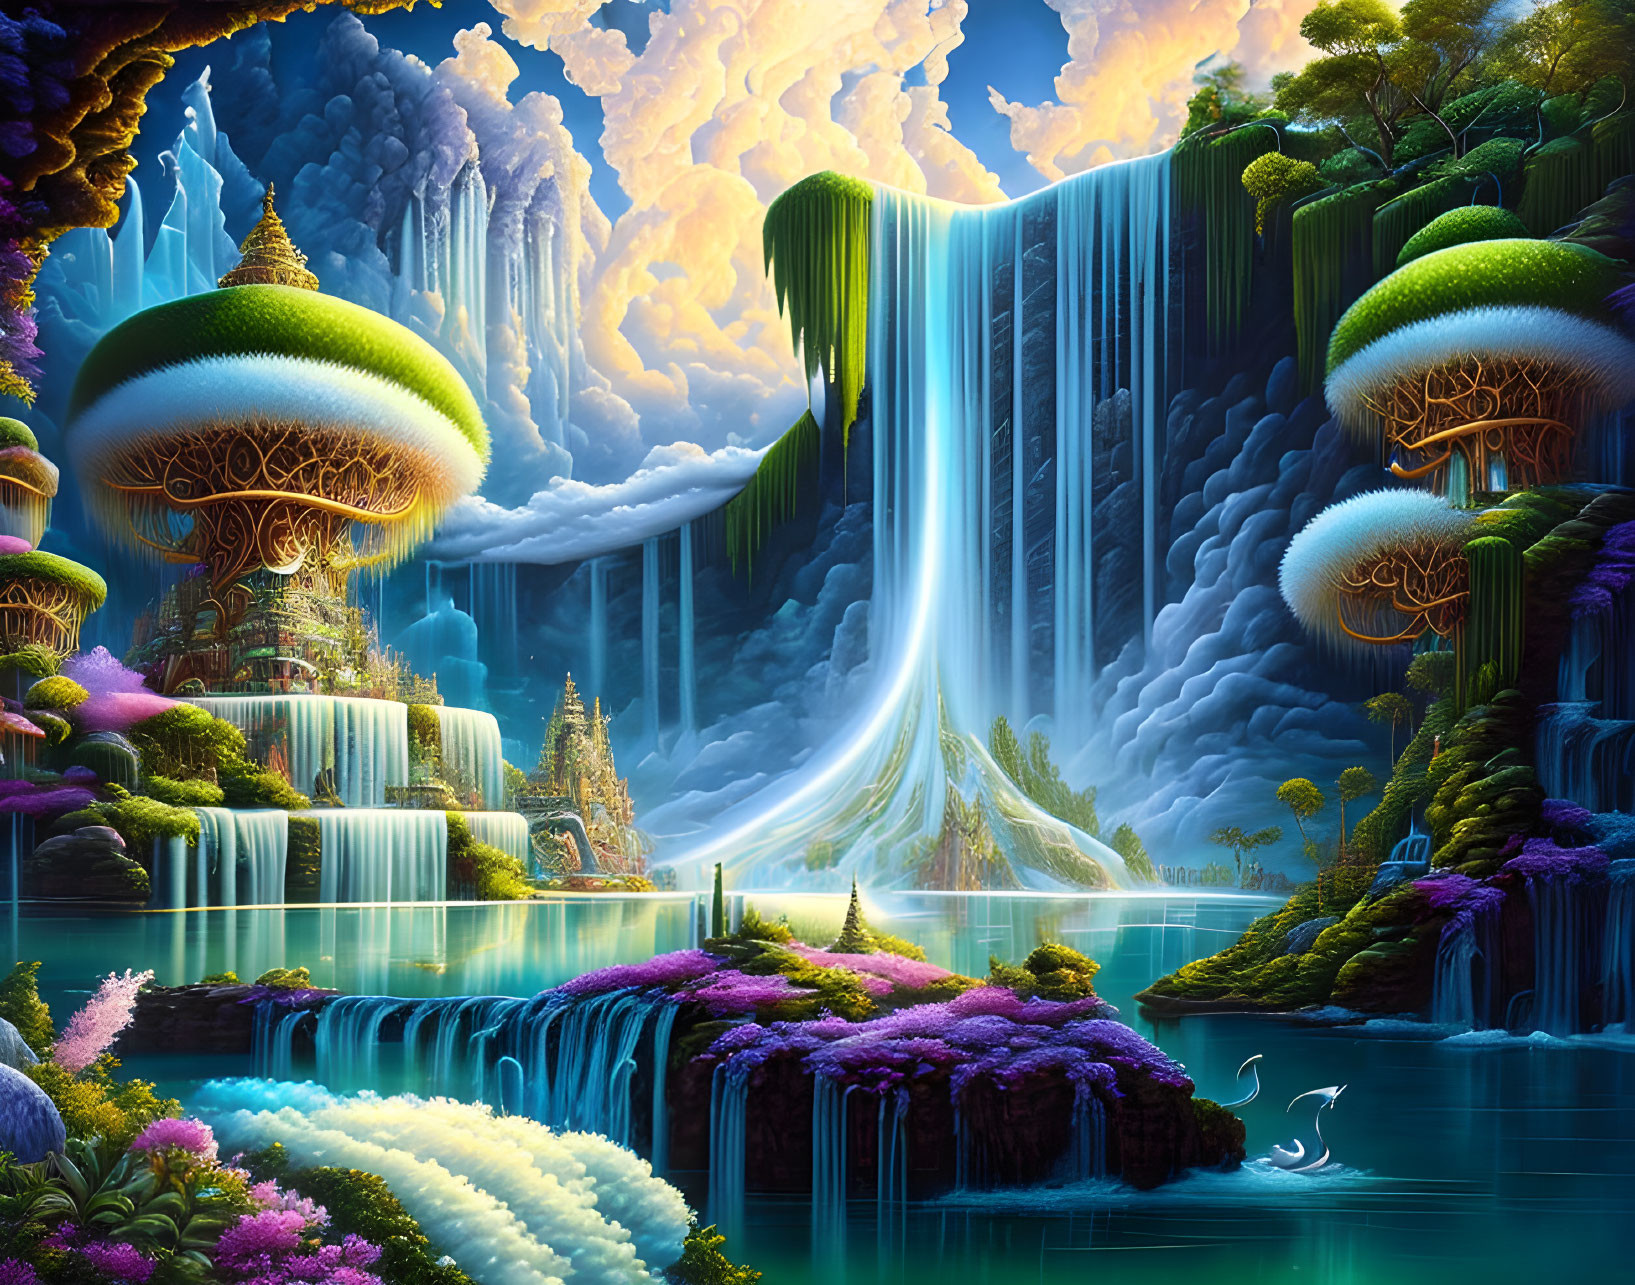 Fantastical landscape with lush greenery, waterfalls, mushroom trees, and clear water